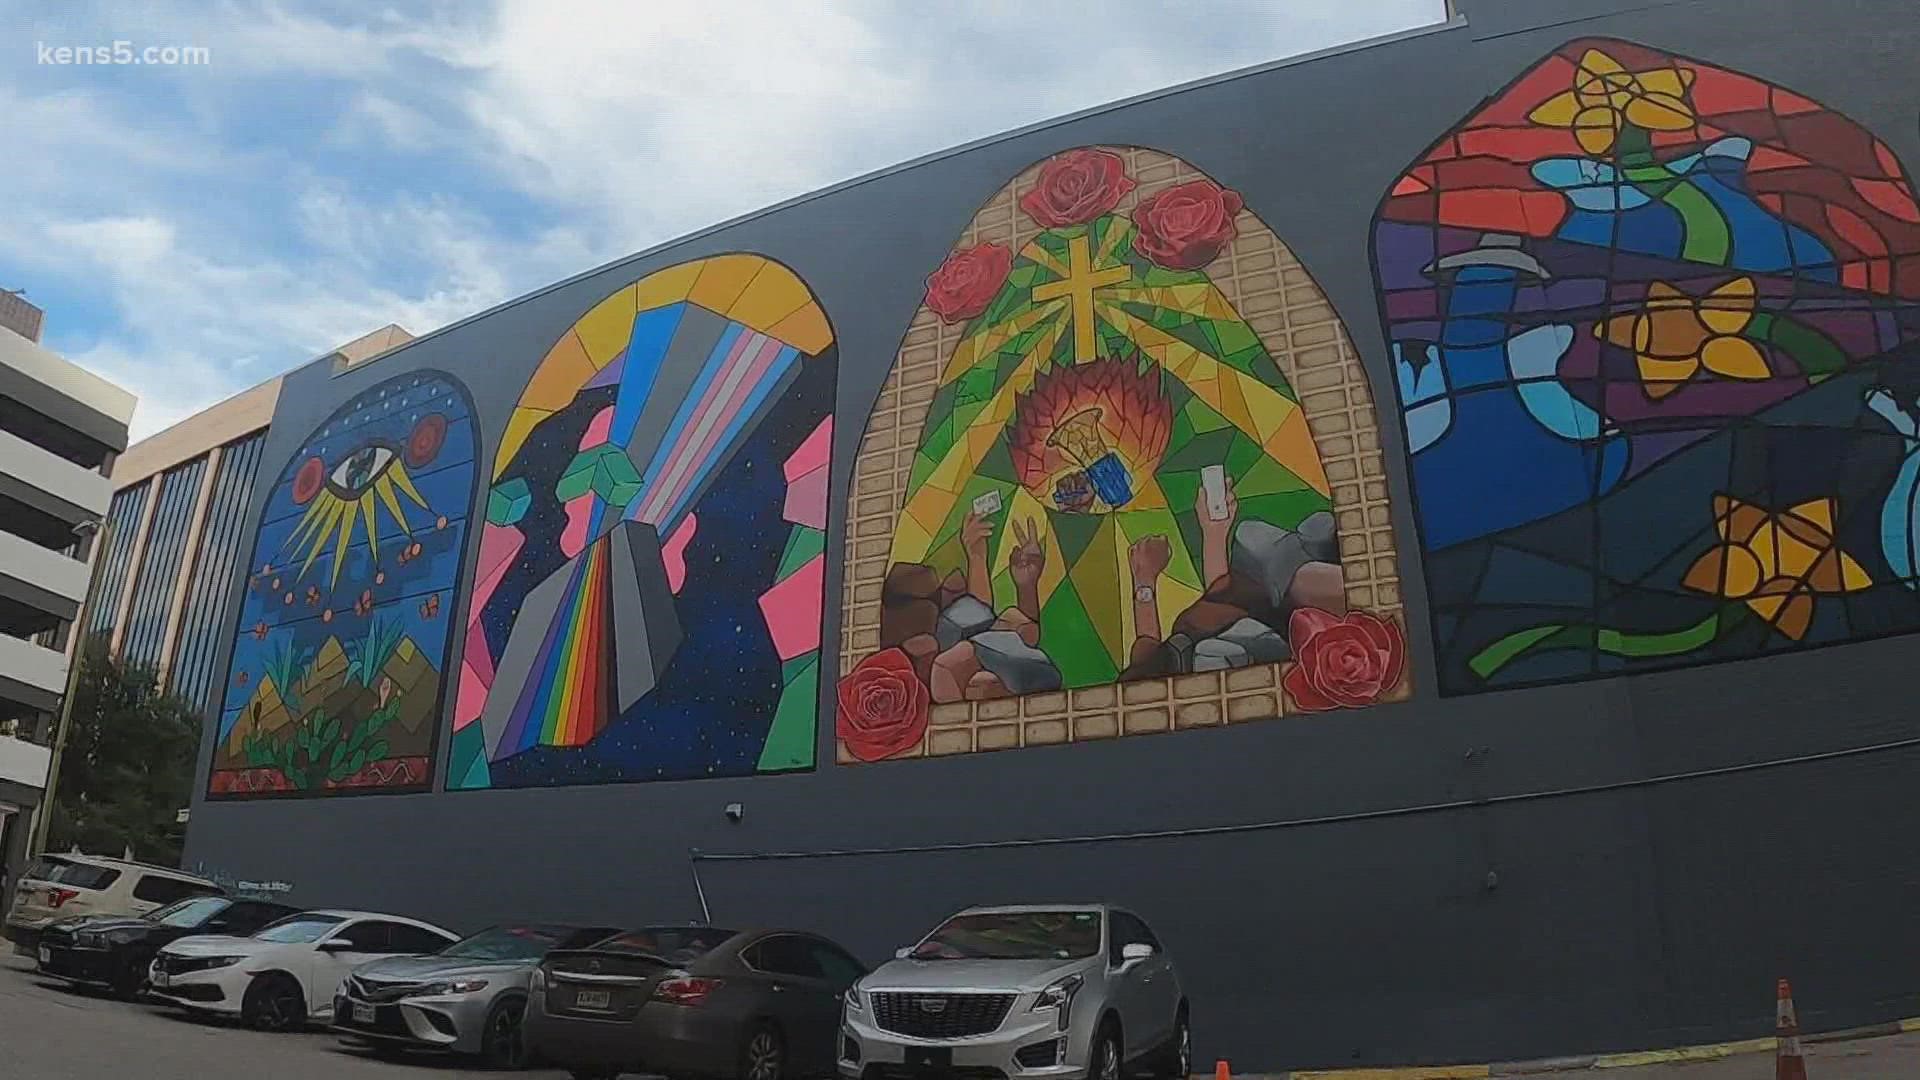 Finishing touches are being added to a new mural encouraging inclusivity at Travis Park Church